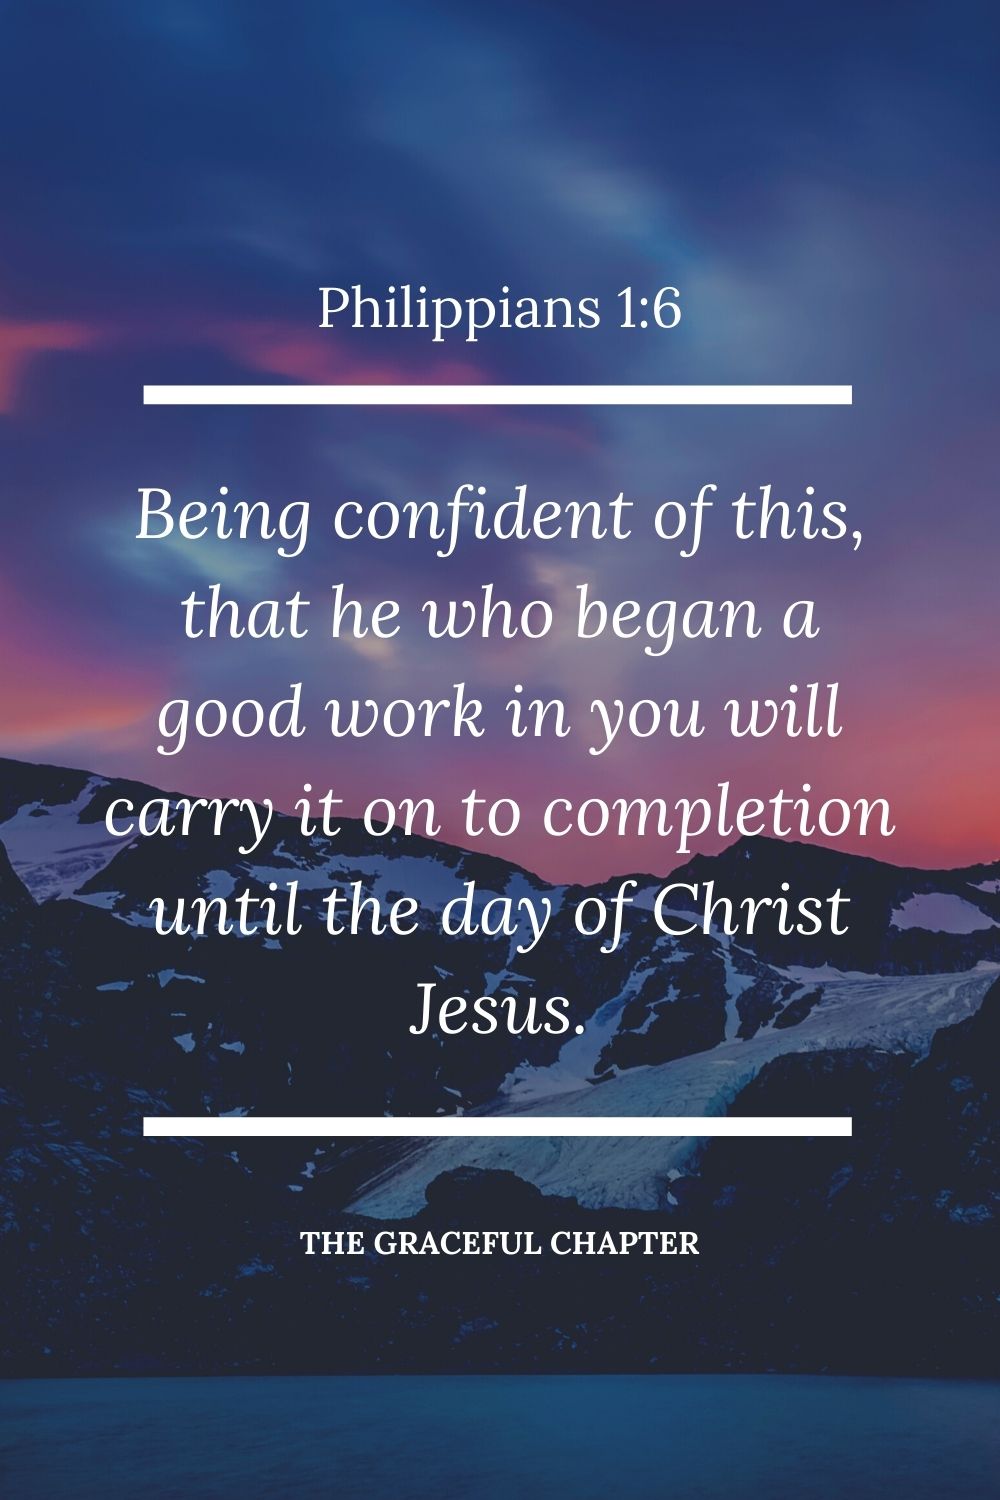 Being confident of this, that he who began a good work in you will carry it on to completion until the day of Christ Jesus. Philippians 1:6